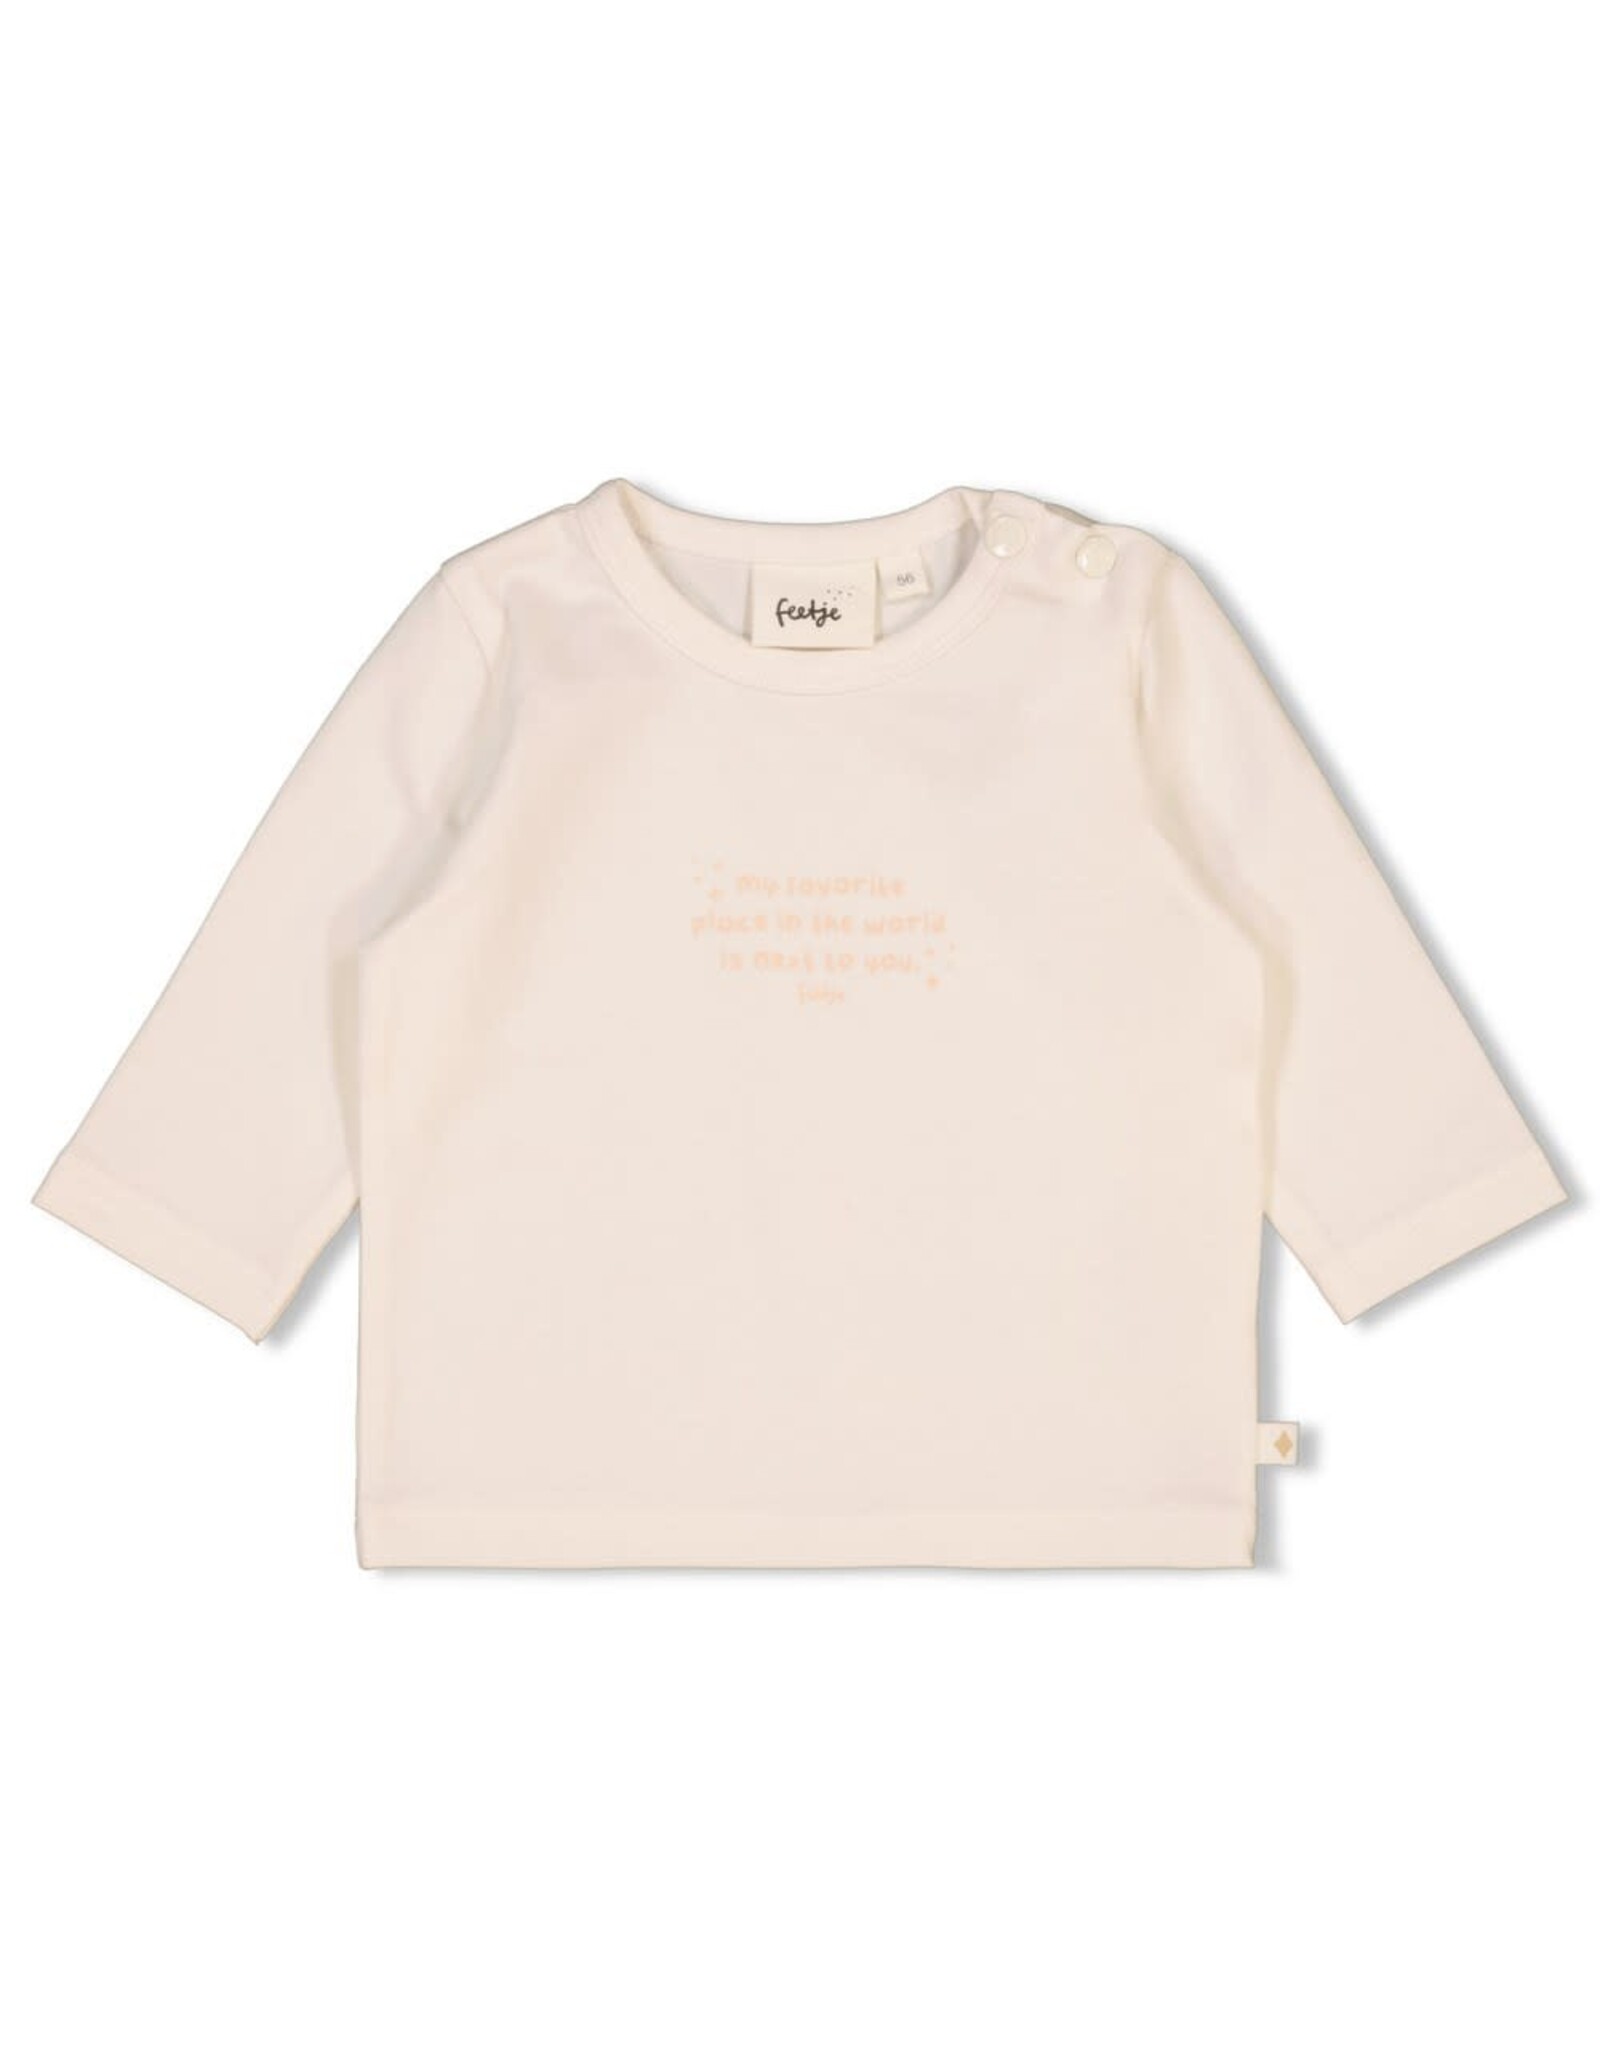 Feetje Longsleeve - The Magic is in You Offwhite /roze NOS